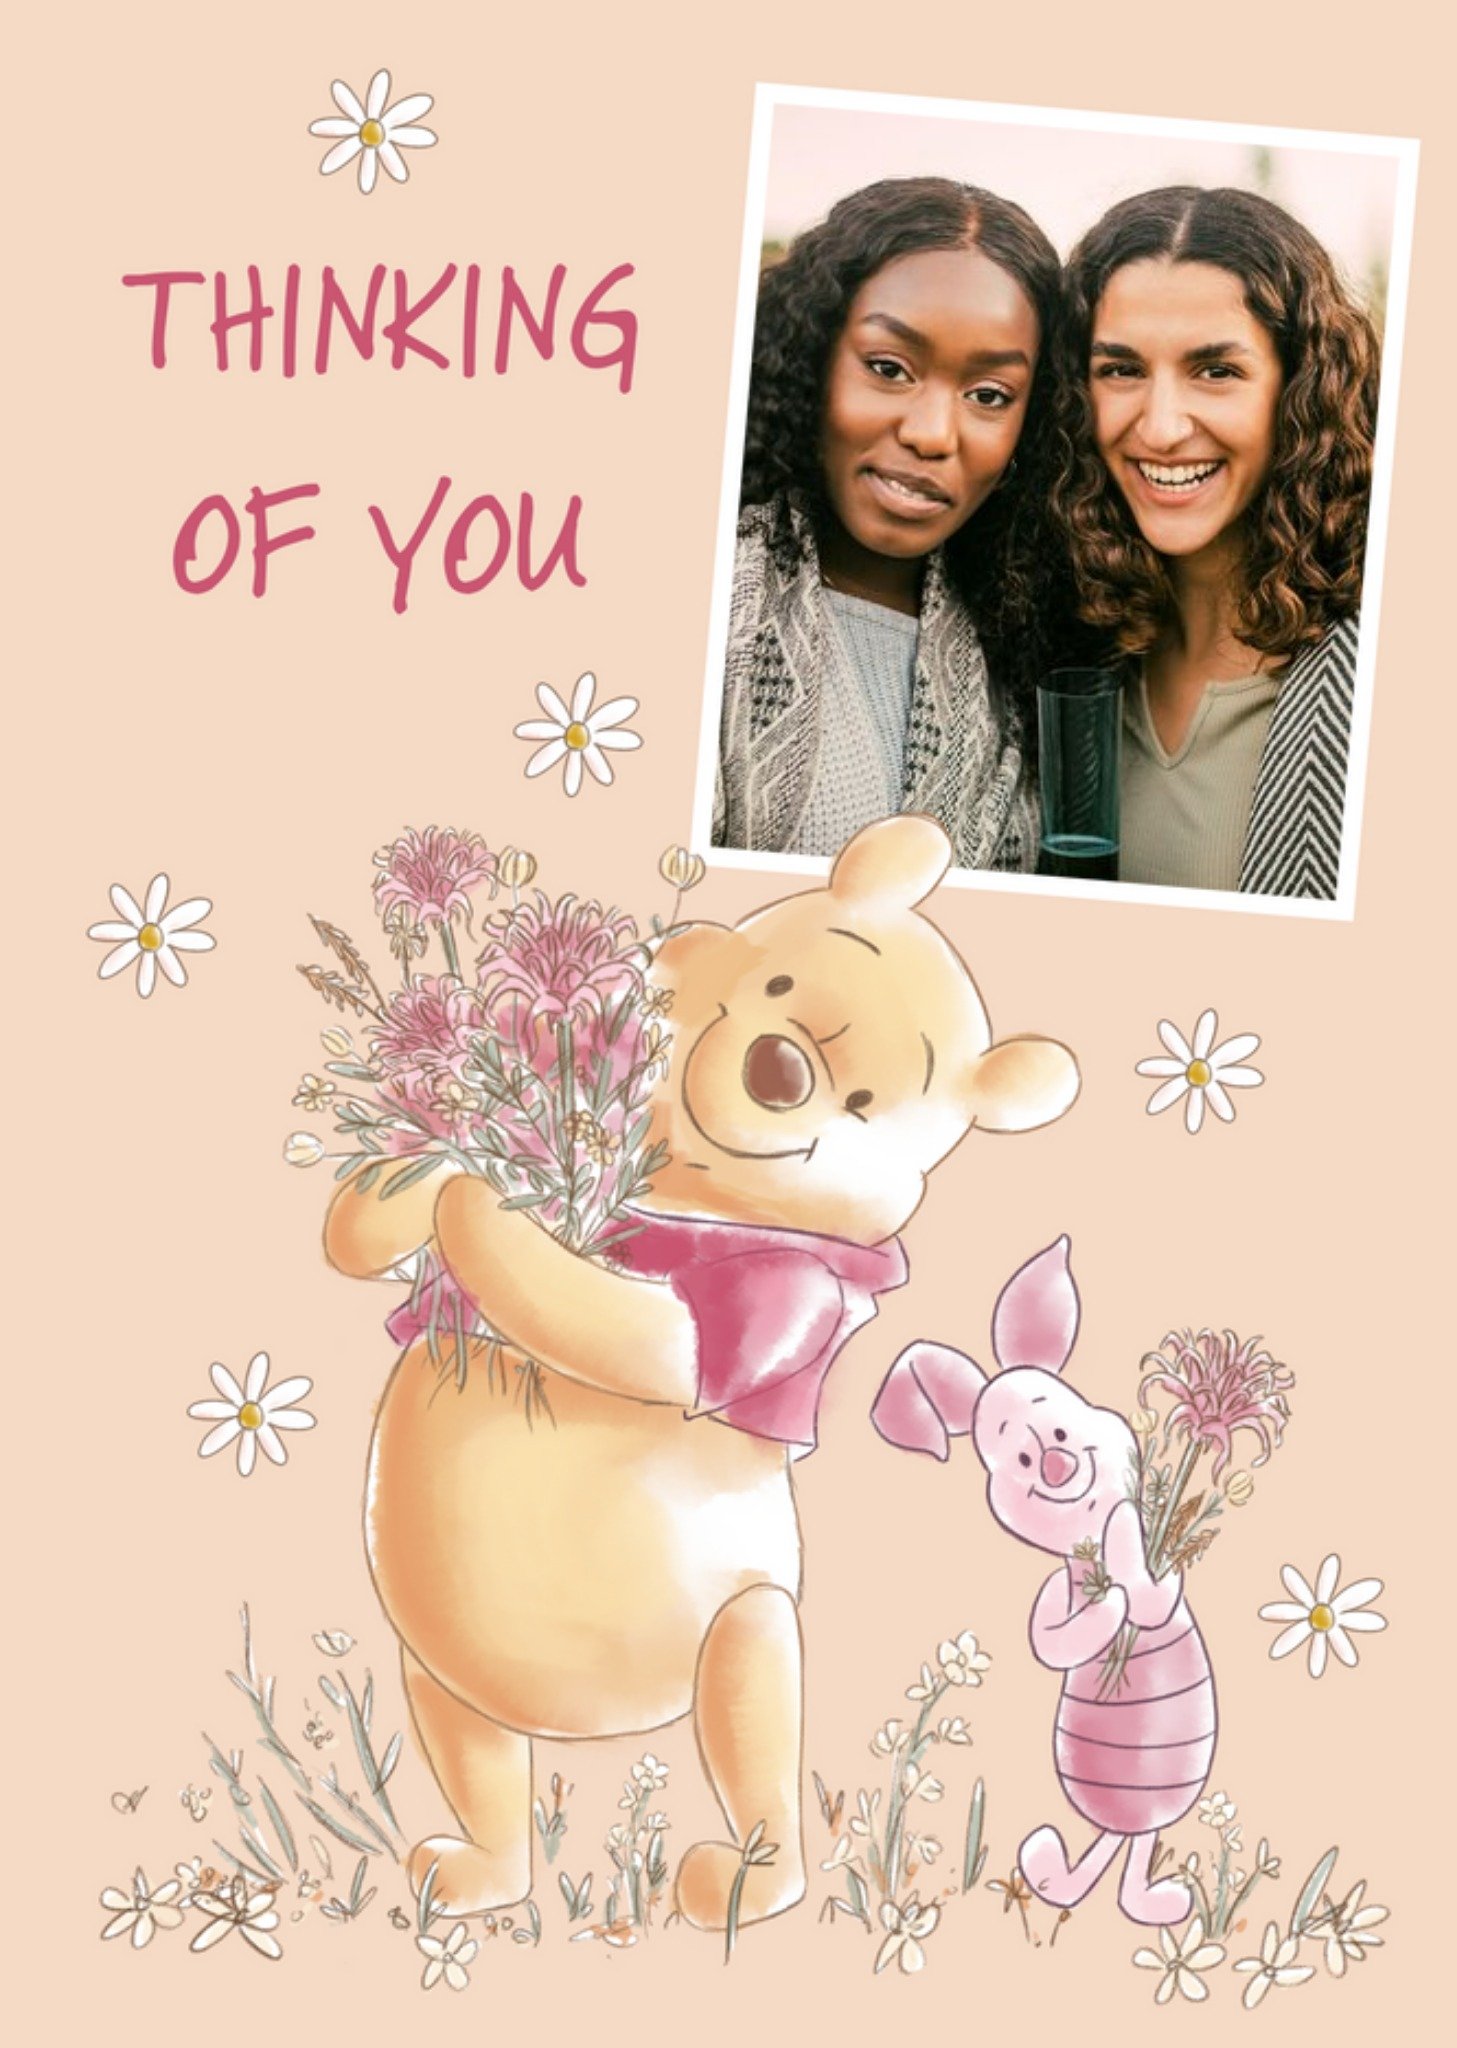 Disney Winnie The Pooh And Piglet Illustration Thinking Of You Photo Upload Card Ecard